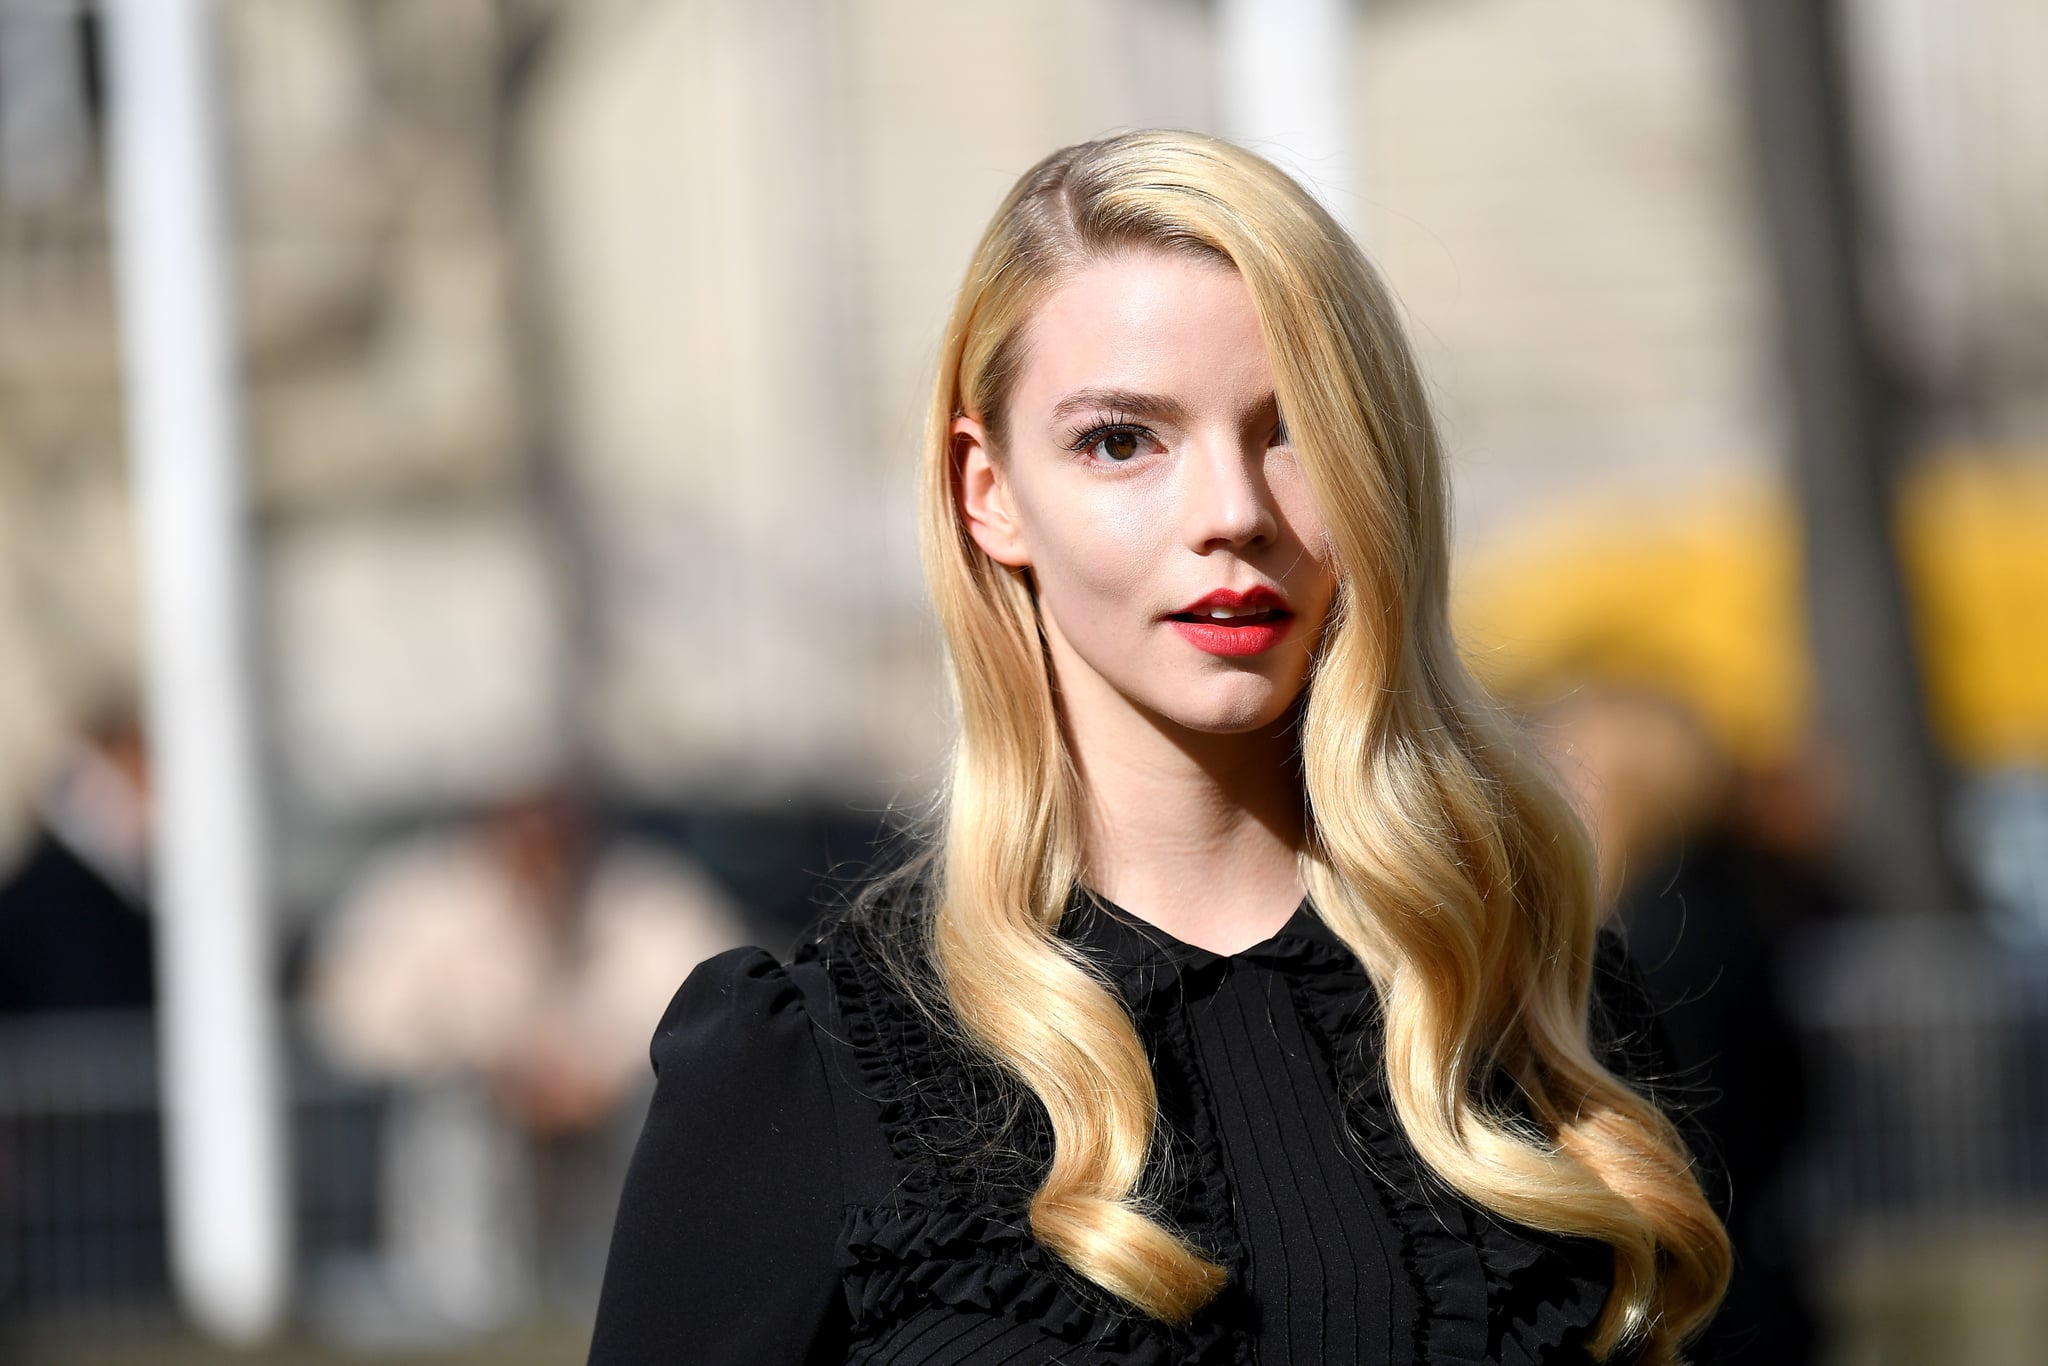 PARIS, FRANCE - MARCH 03: Anya Taylor-Joy attends the Miu Miu show as part of the Paris Fashion Week Womenswear Fall/Winter 2020/2021 on March 03, 2020 in Paris, France. (Photo by Jacopo Raule/Getty Images)